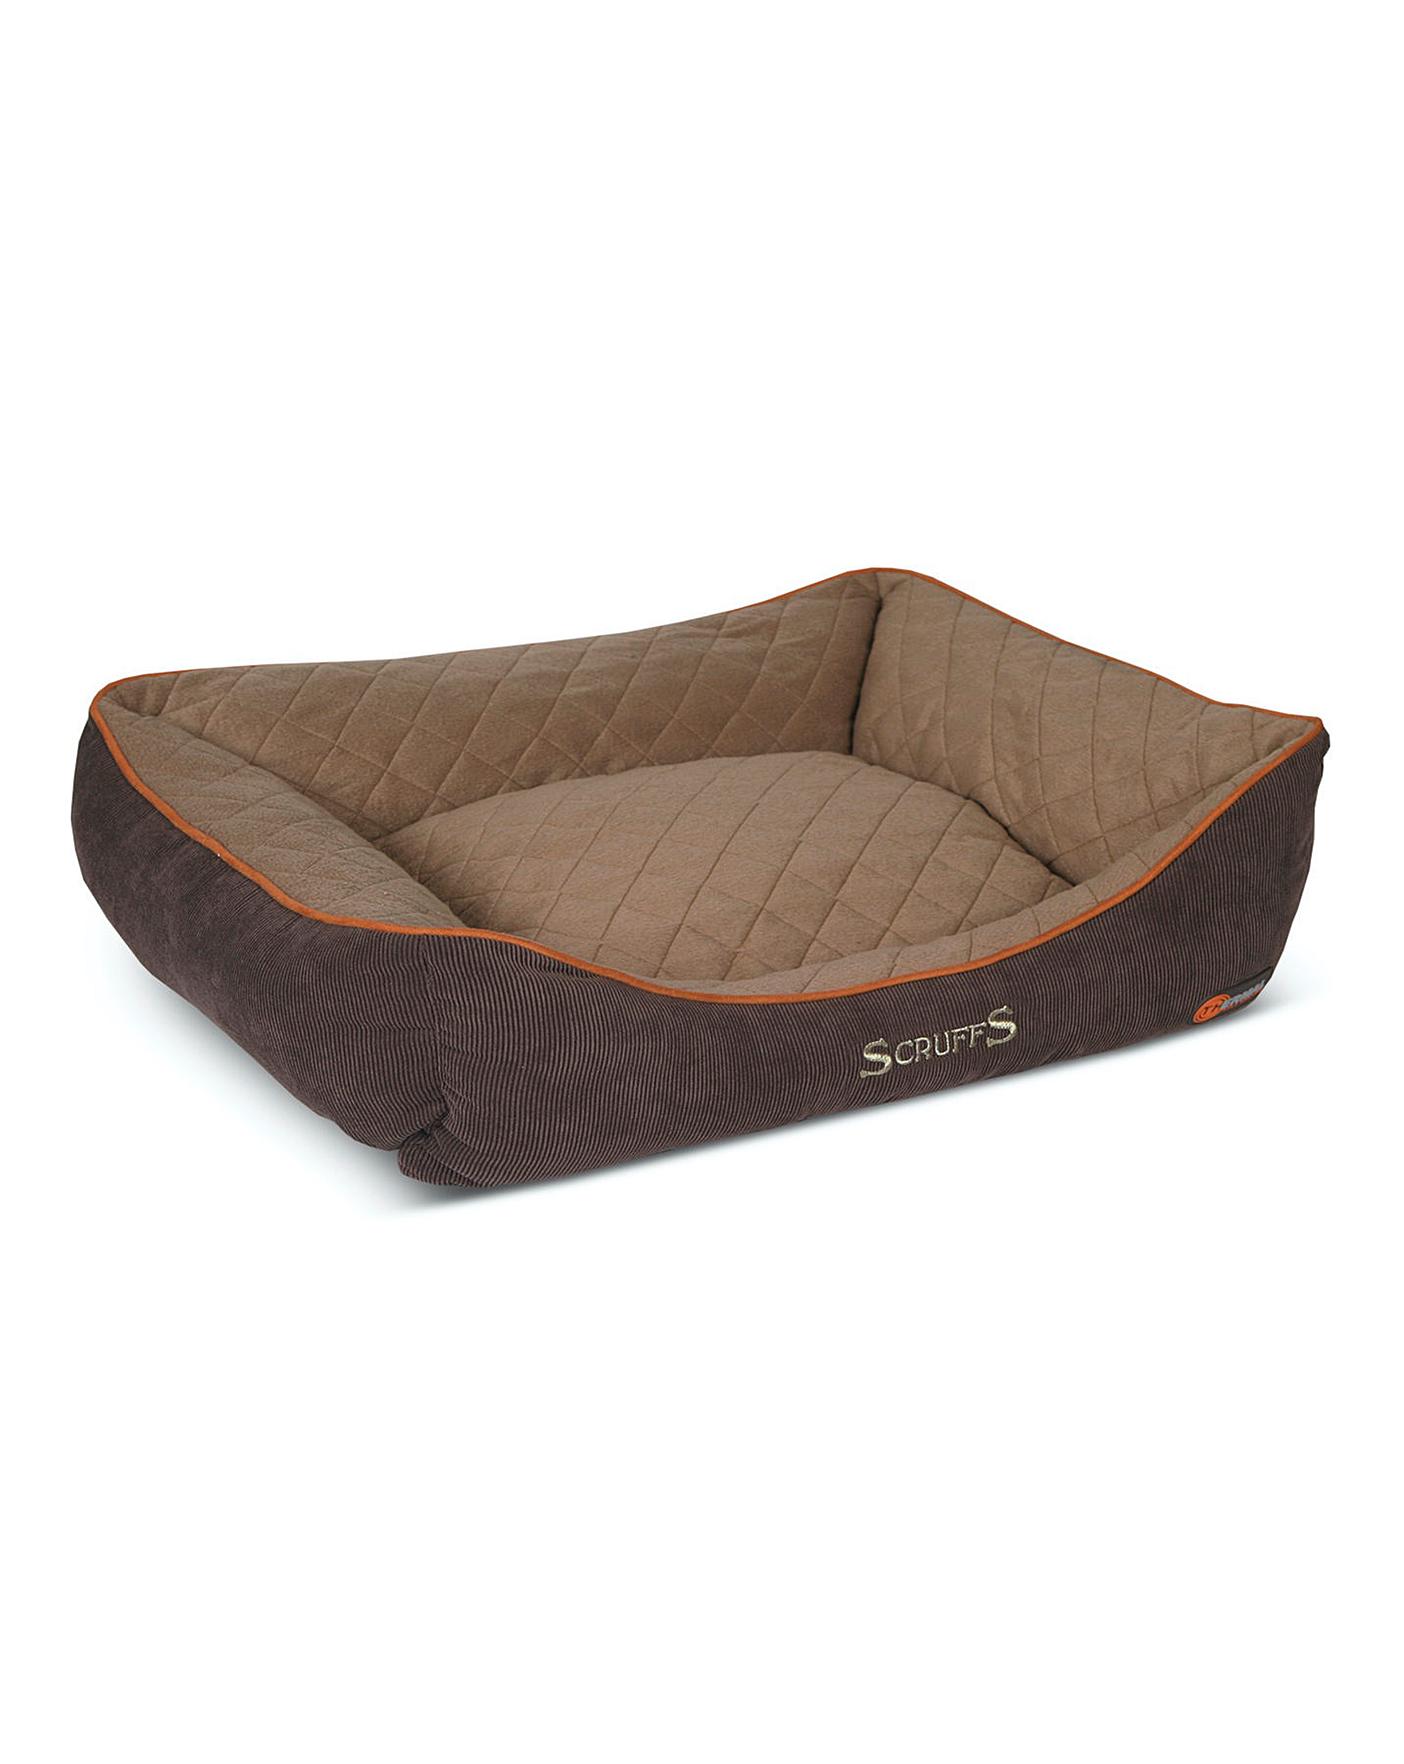 Scruffs Thermal Dog Box Bed self-heating bed is the ideal choice to keep your pe 